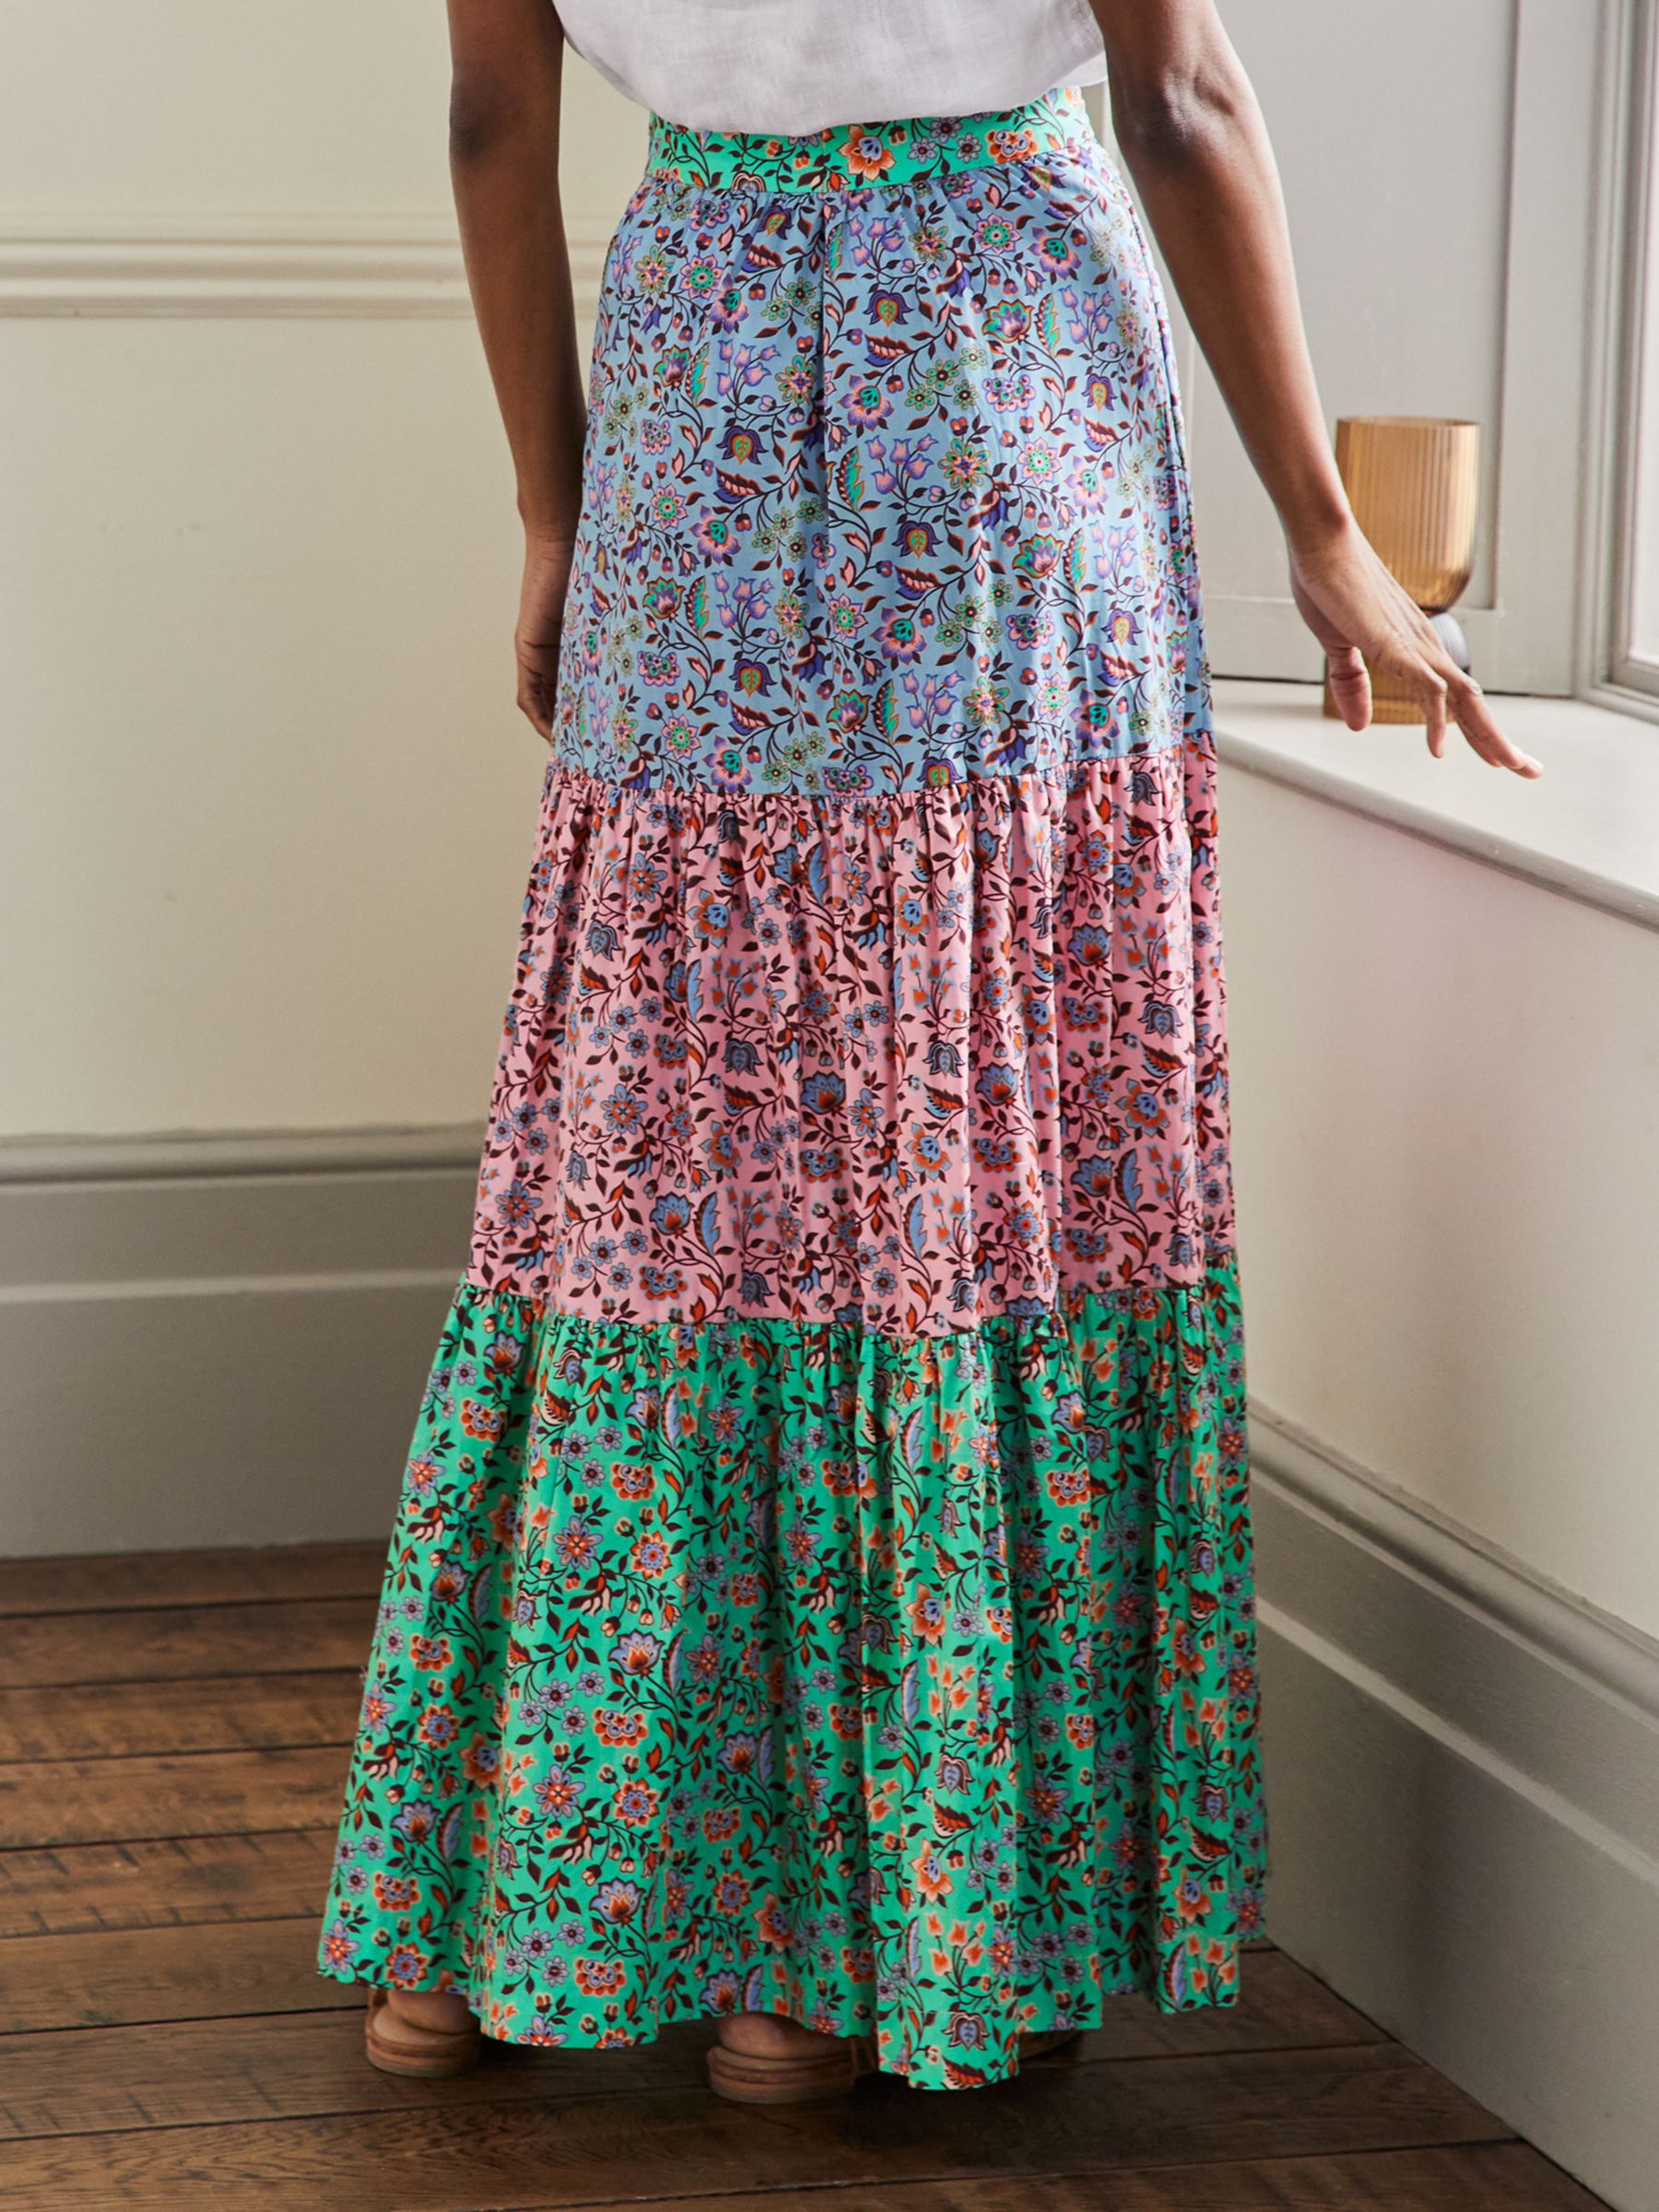 Boden Lorna Floral Print Tiered Maxi Skirt, Formica Pink at John Lewis ...